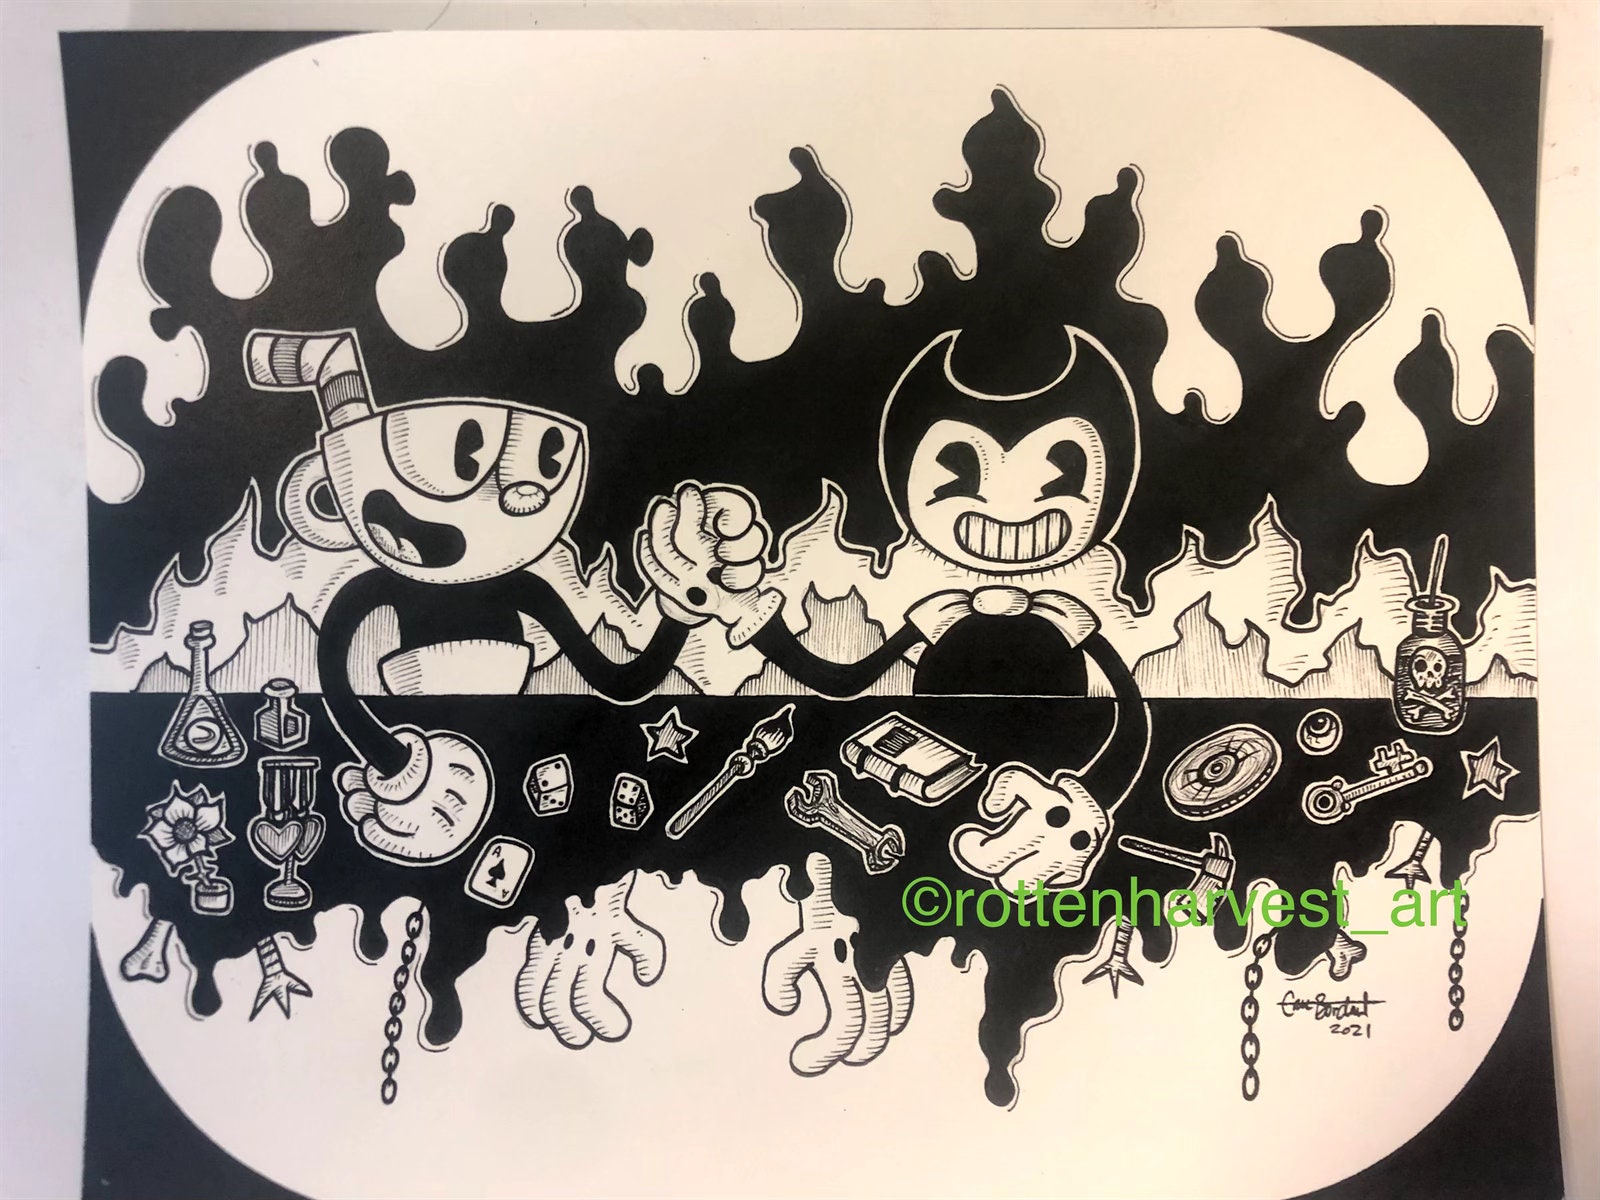 the cuphead show, video game, new 2022 character, colored,  clipart,svg,png,pdf files, vectorized